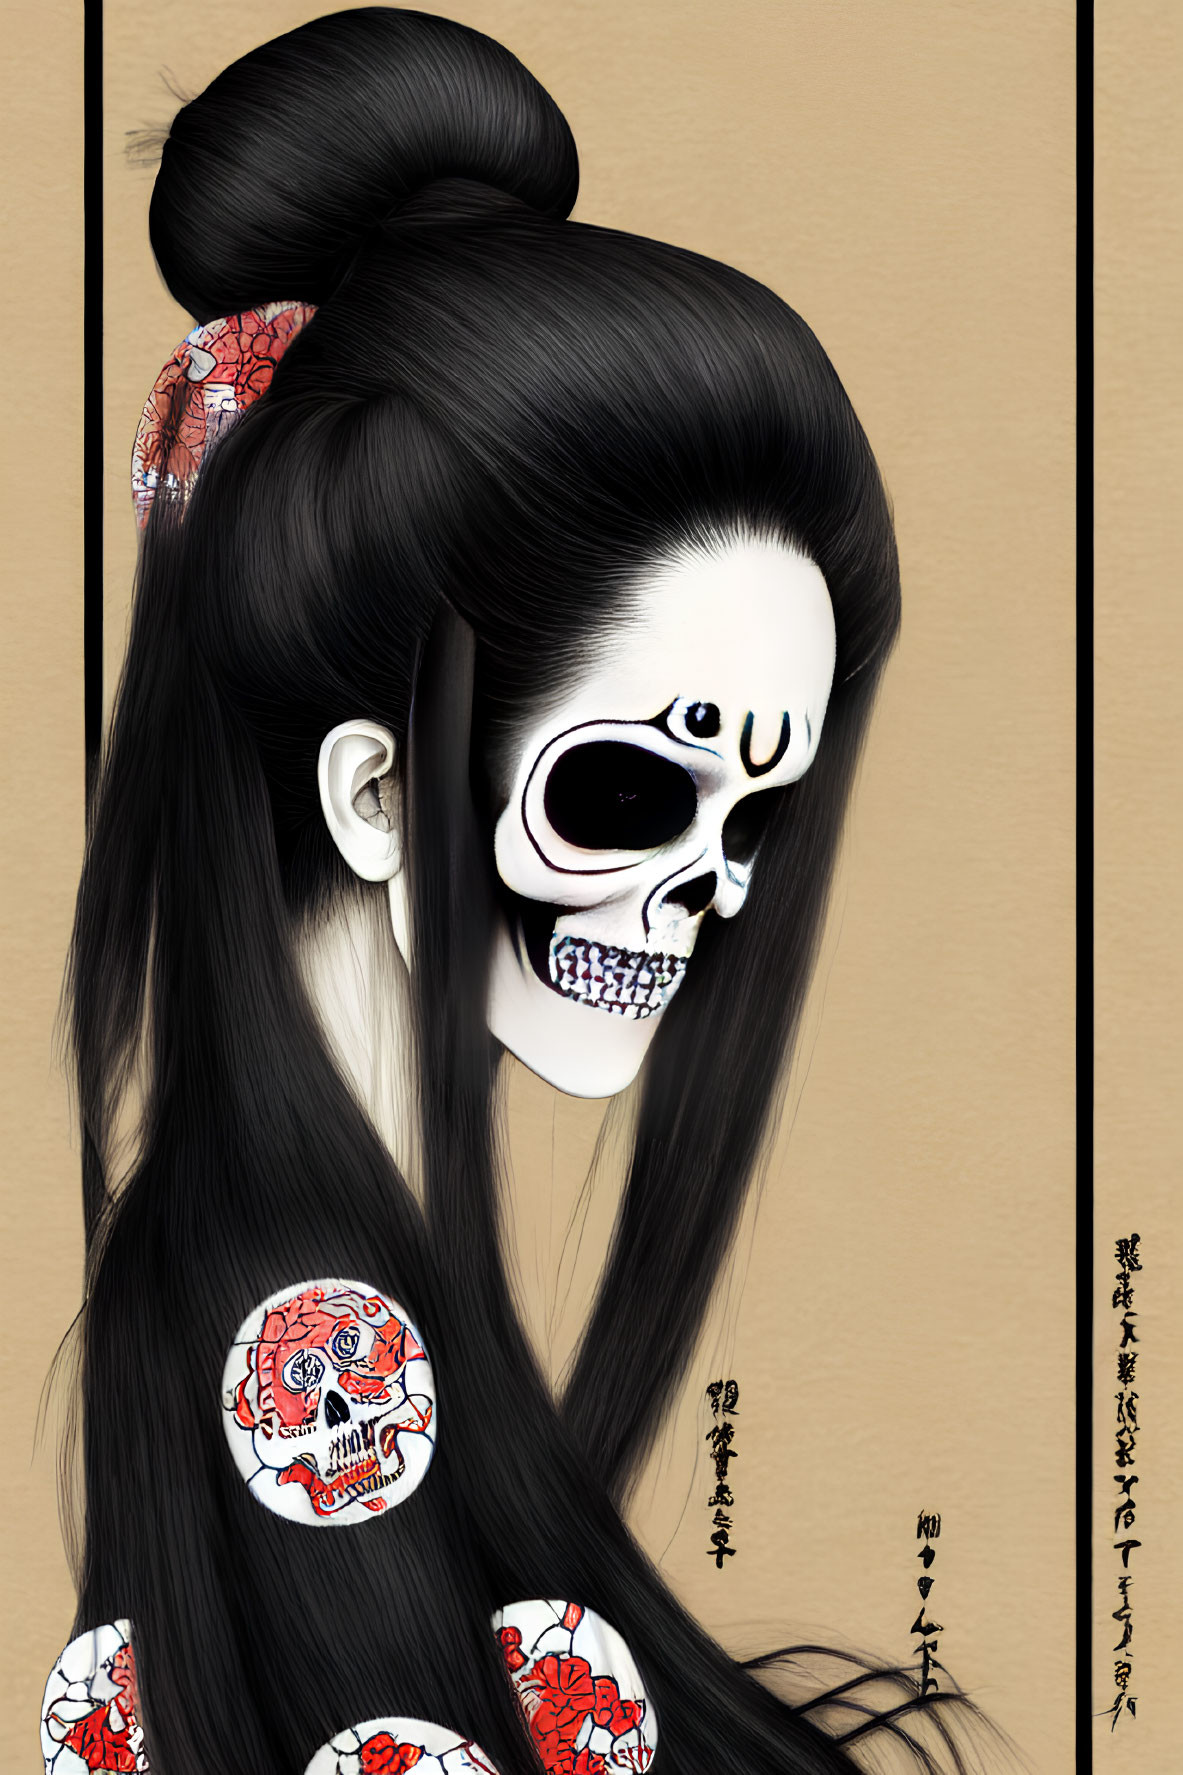 Stylized illustration of person with black hair and skull makeup in Japanese motif setting